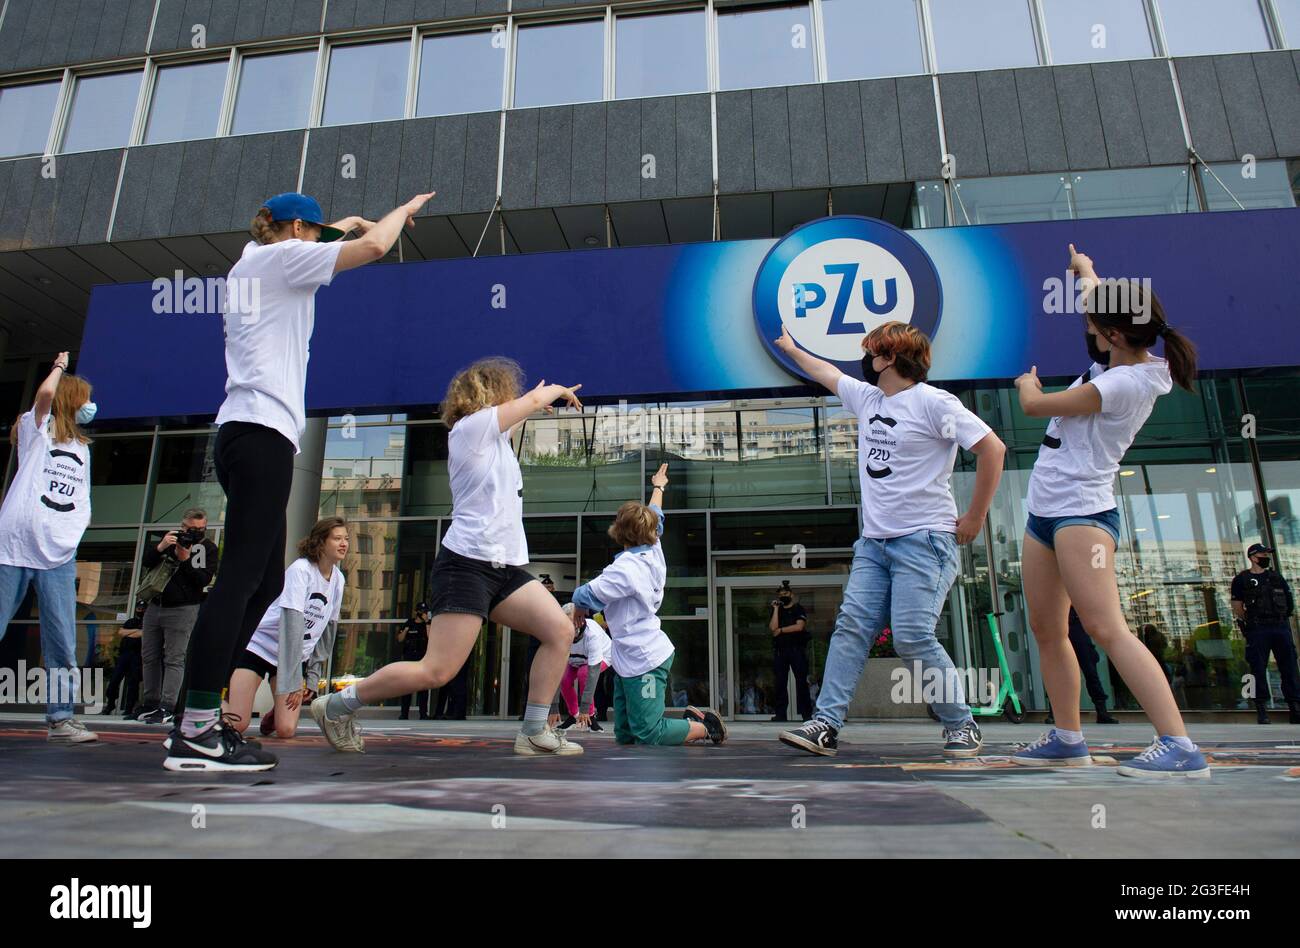 June 16, 2021, Warsaw, Warsaw, Poland: Extinction Rebellion activists perform during a protest next to the PZU insurance headquarter on June 16, 2021 in Warsaw, Poland. A few dozens of members of the environmental movement Extinction Rebellion Polska (XR) gathered next to the headquarter of the biggest Polish insurance group PZU to demand immediate pull out of PZU's from all coal investments and to adopt a new strategy based on scientific knowledge to tackle climate change according to the European Union climate goals and Poland's obbligations towards the Paris Agreement. (Credit Image: © Ale Stock Photo